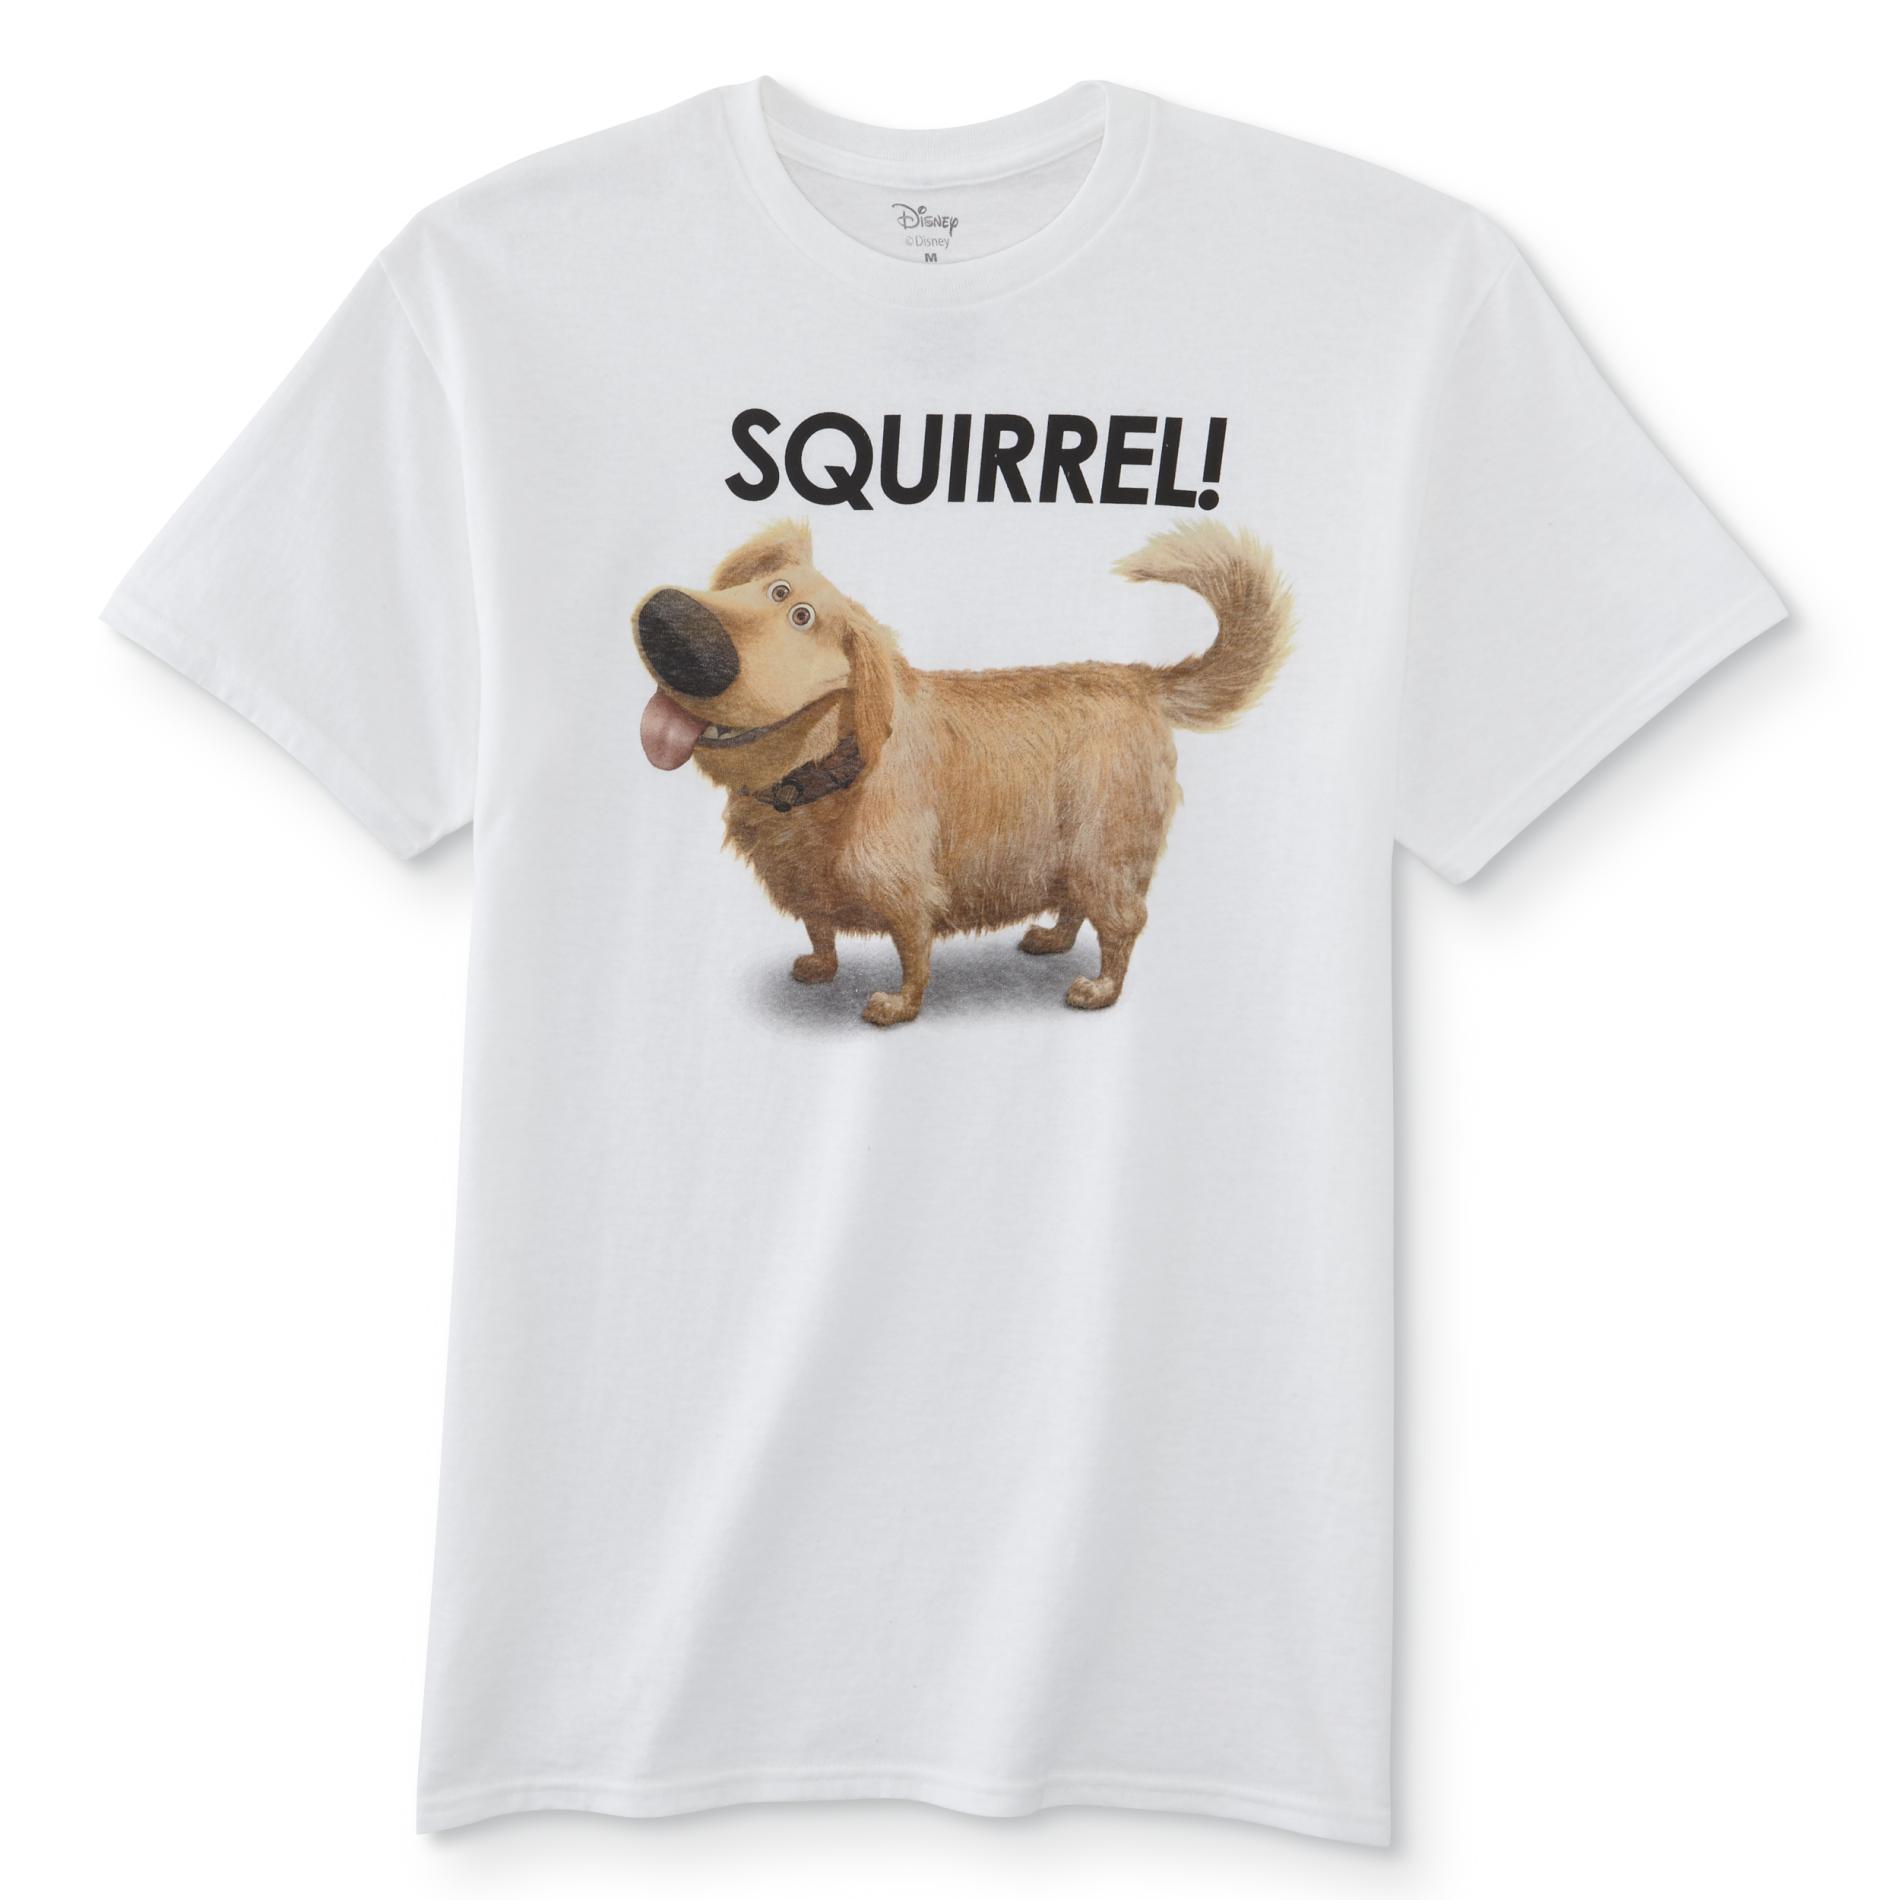 Up Young Men's Graphic T-Shirt - Dug/Squirrel!